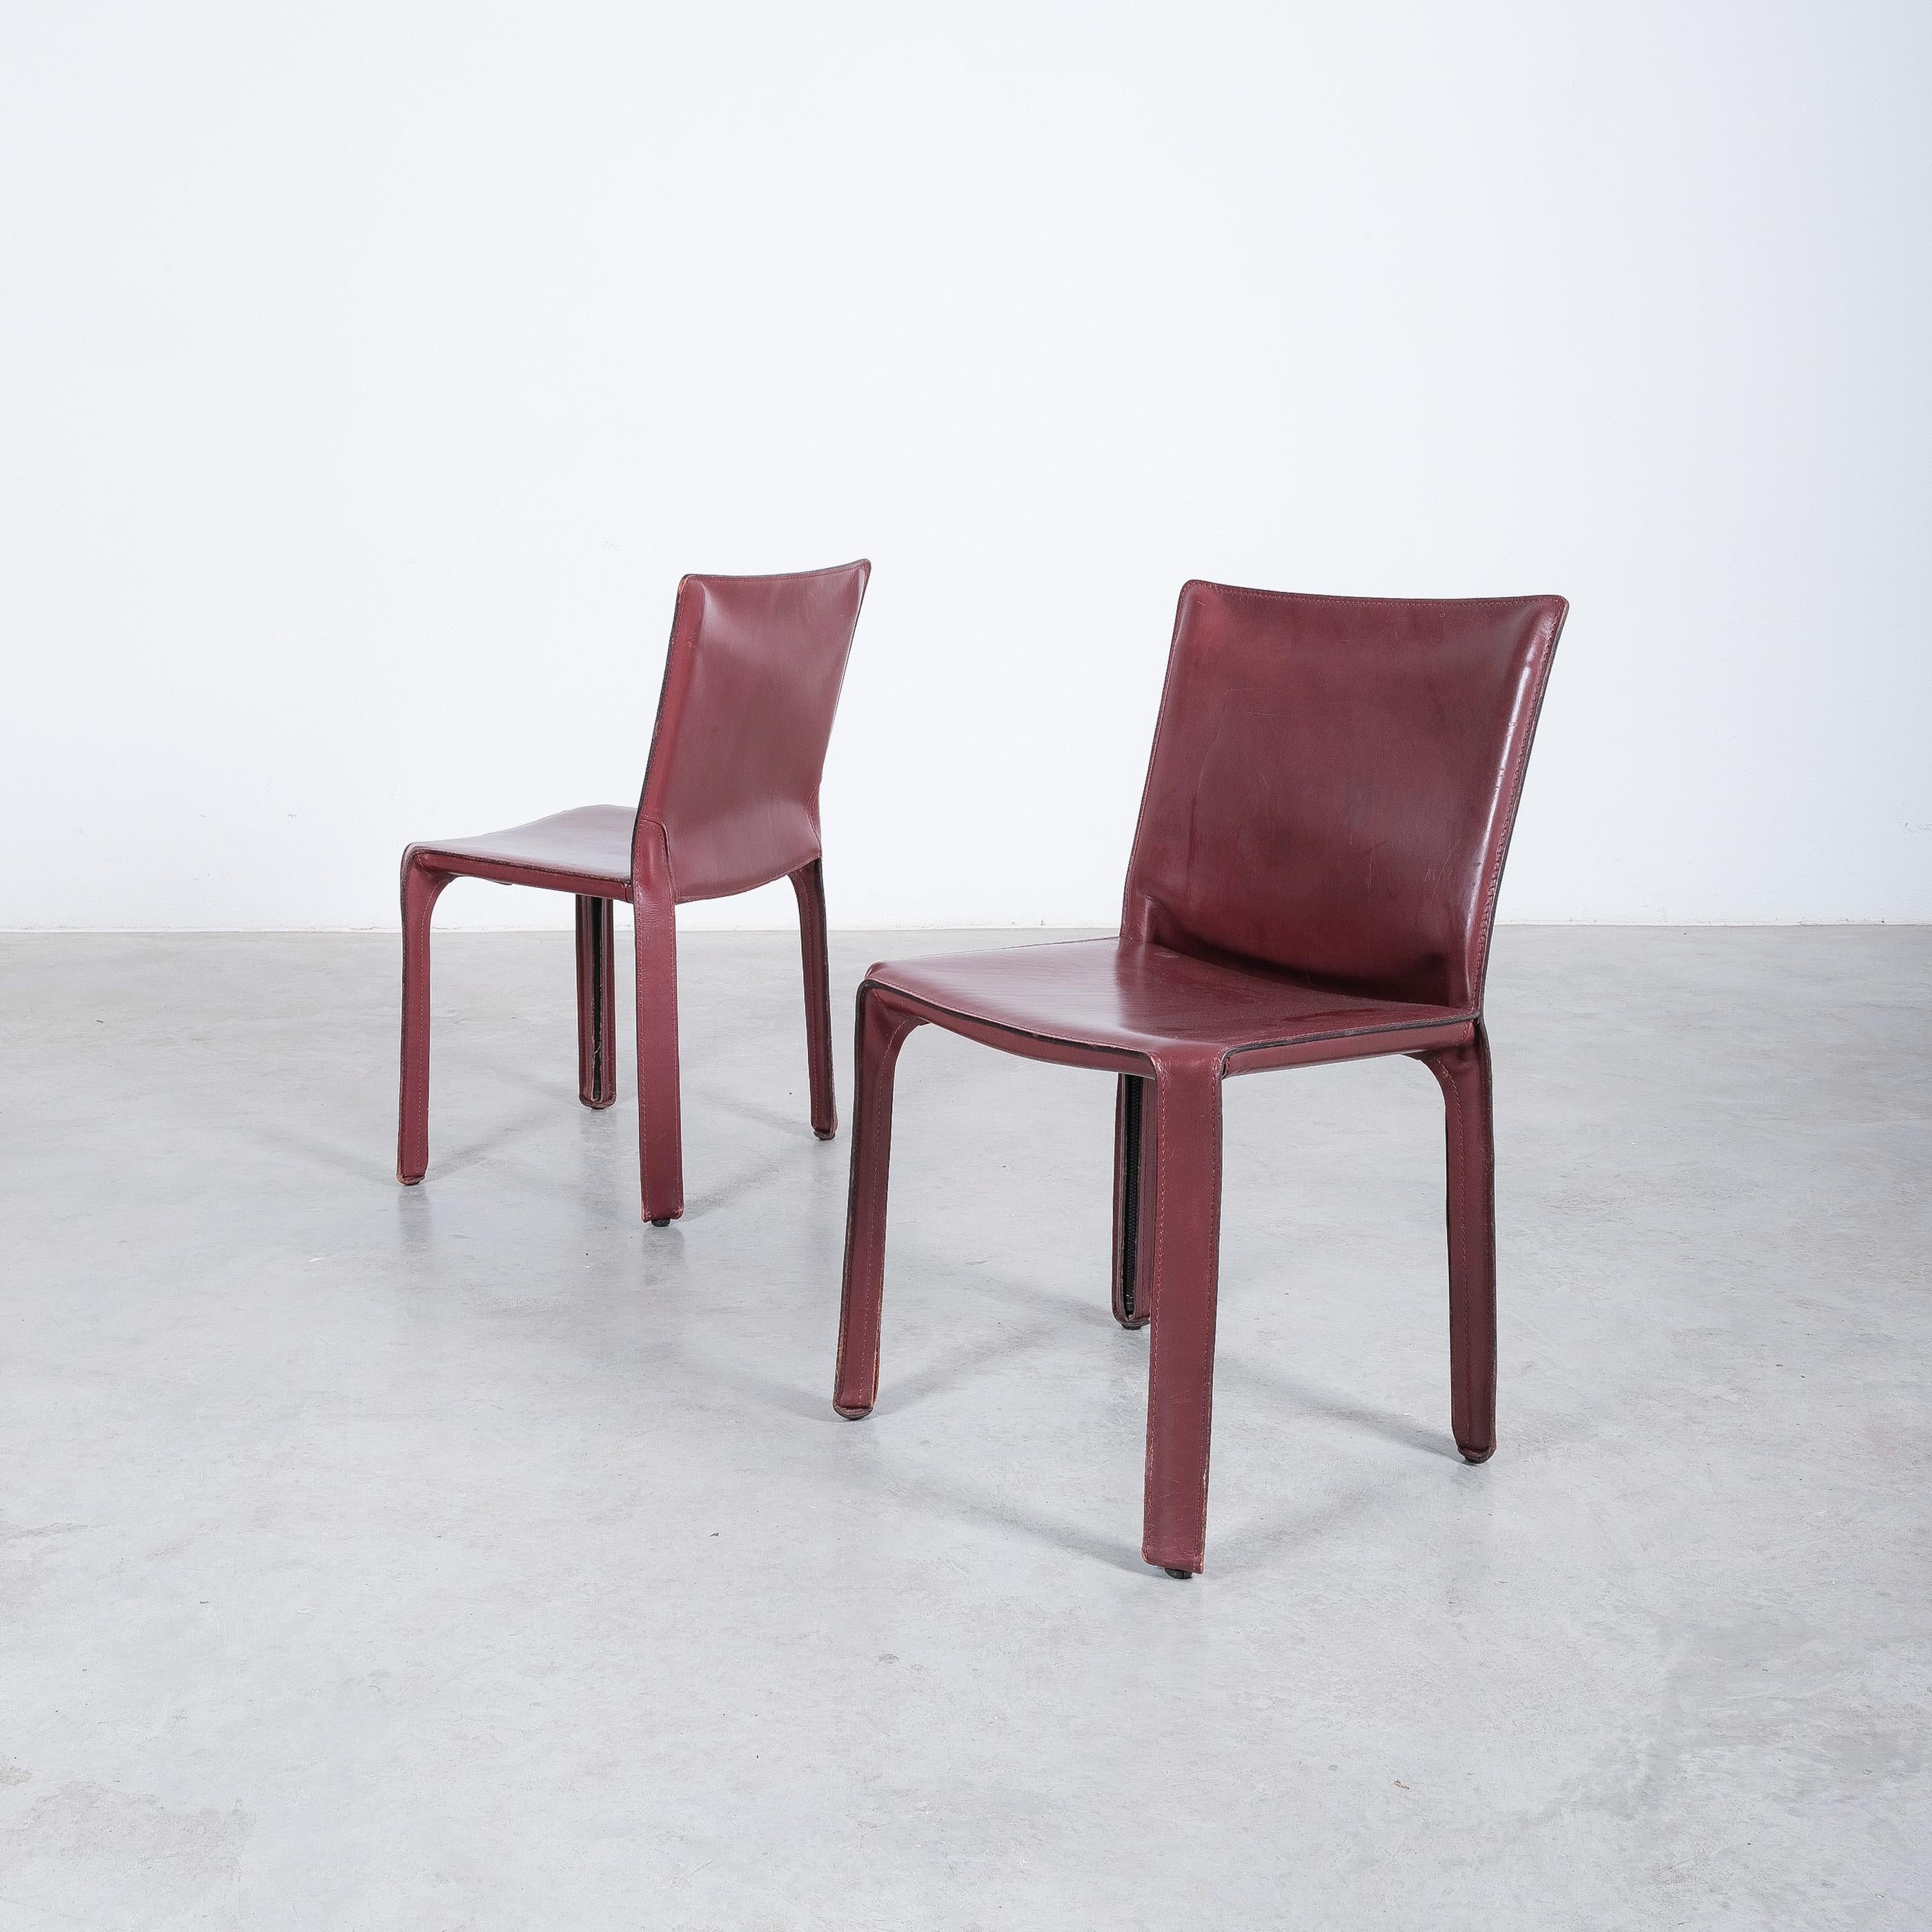 Mario Bellini Cassina Cab 412, 413 Set of Ten 10 Red Leather Dining Chairs 10